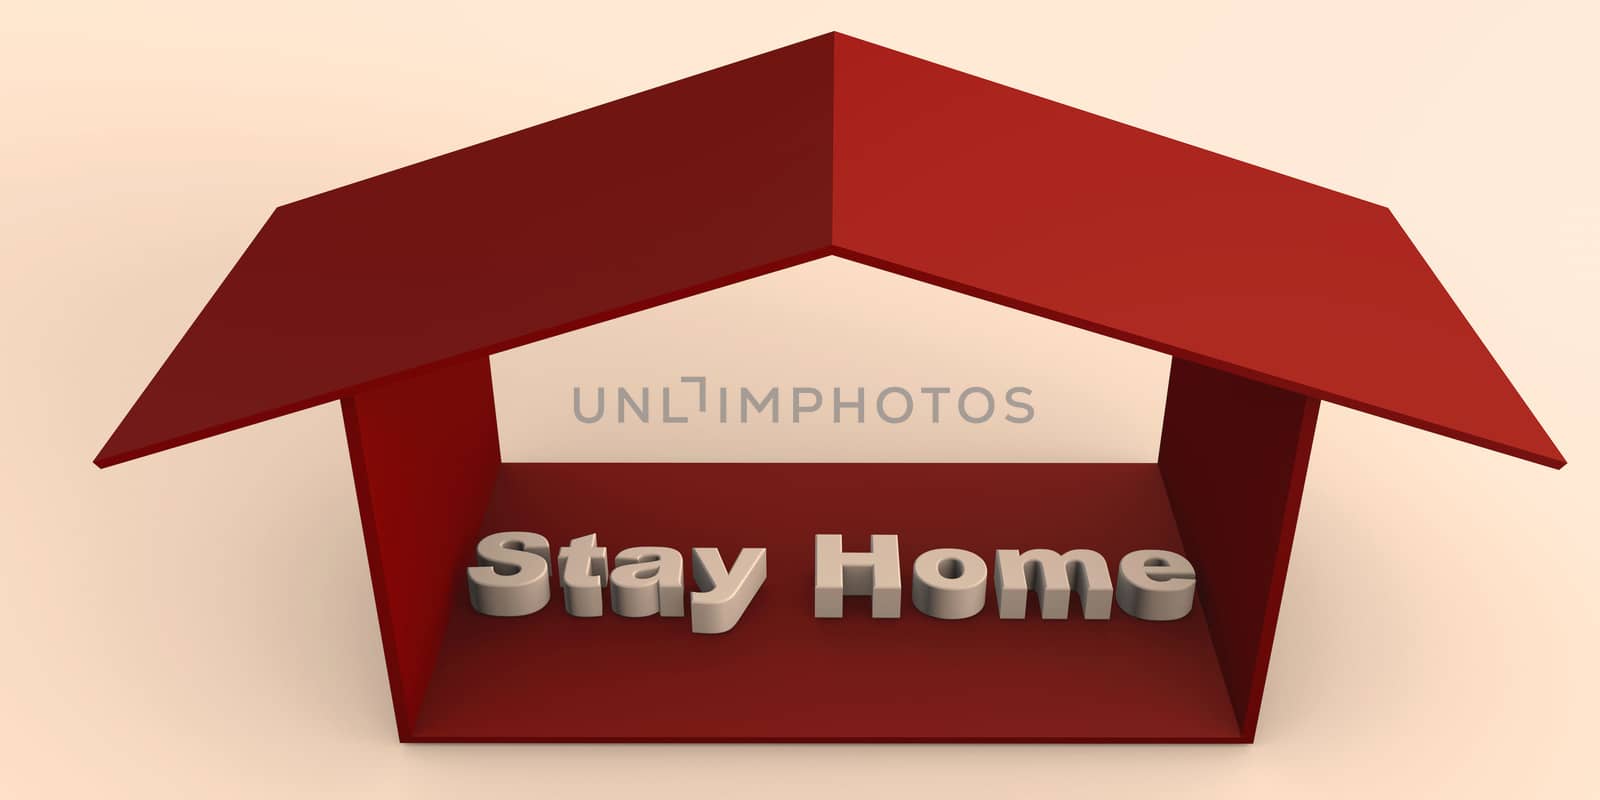 Stay at home keep safe be responsible 3D concept isolated on white by F1b0nacci